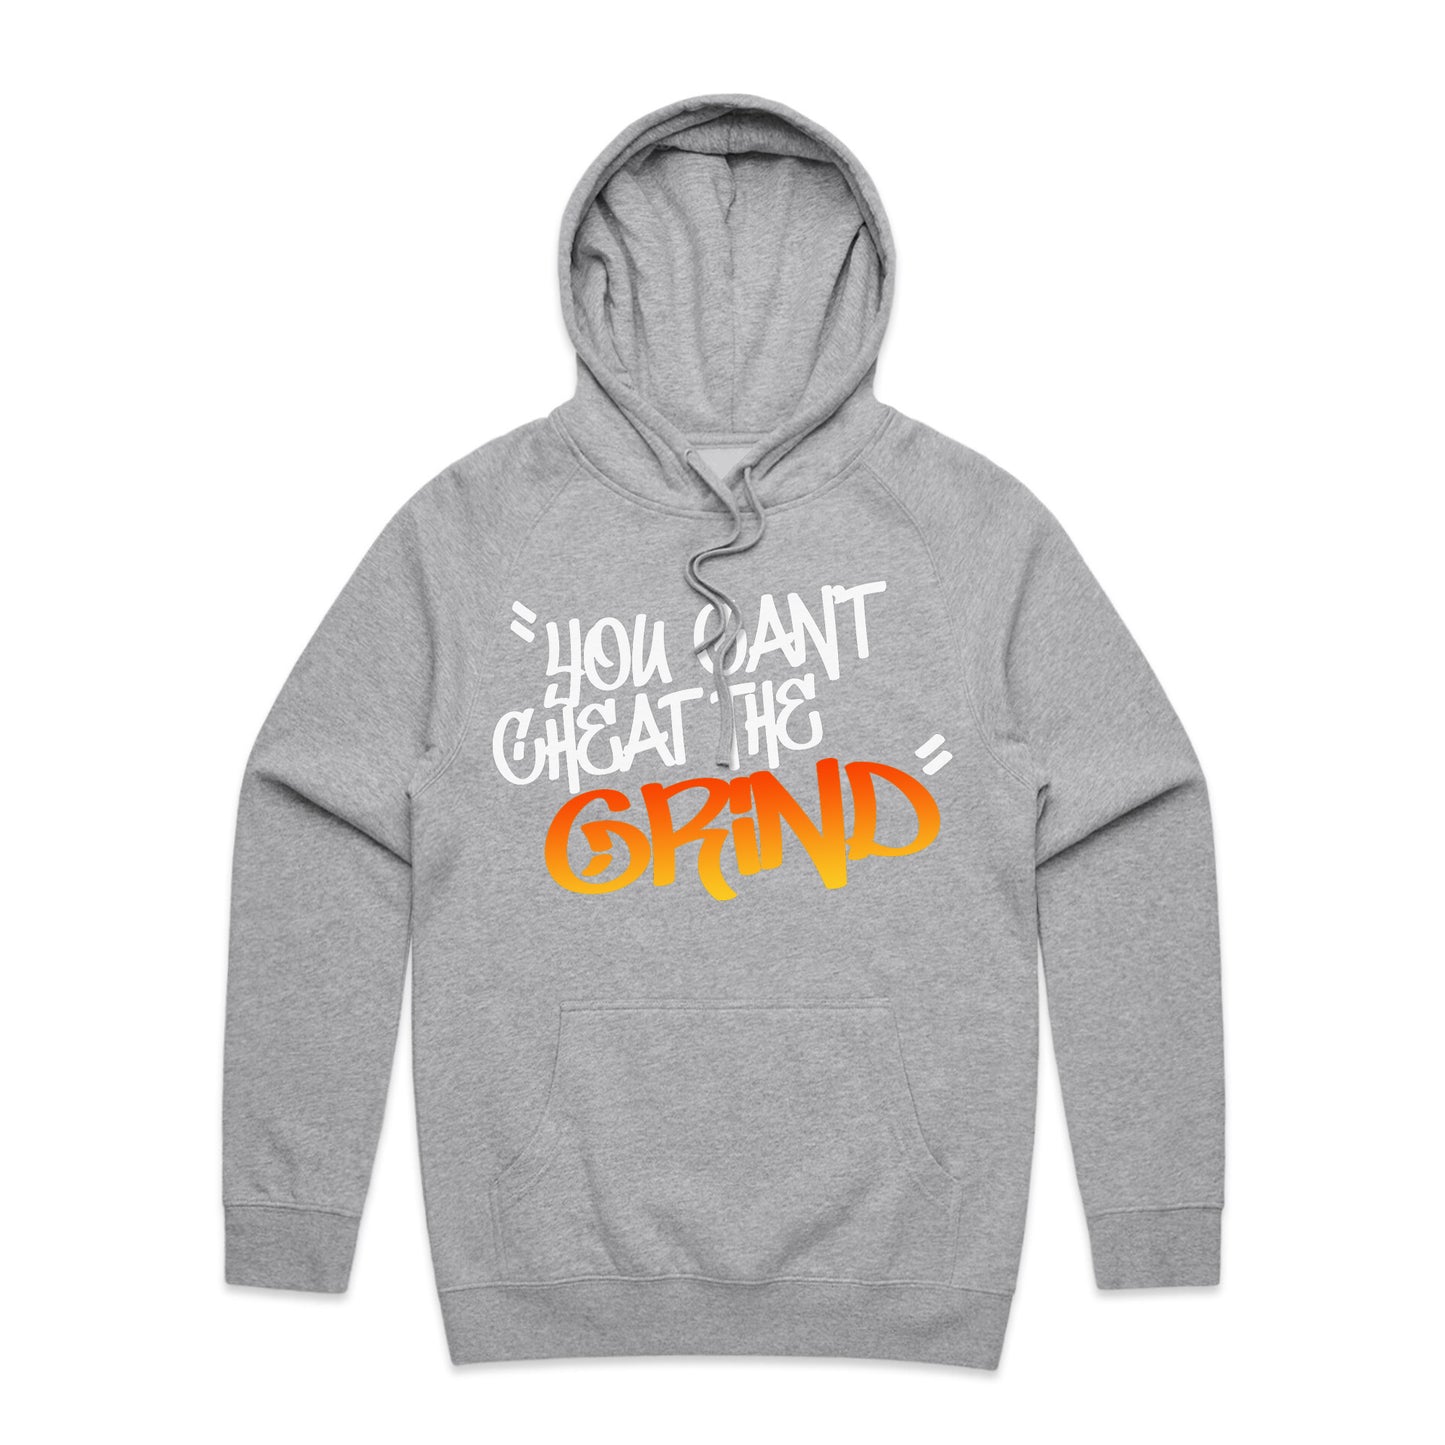 Can't Cheat The Grind Hoodie Grey